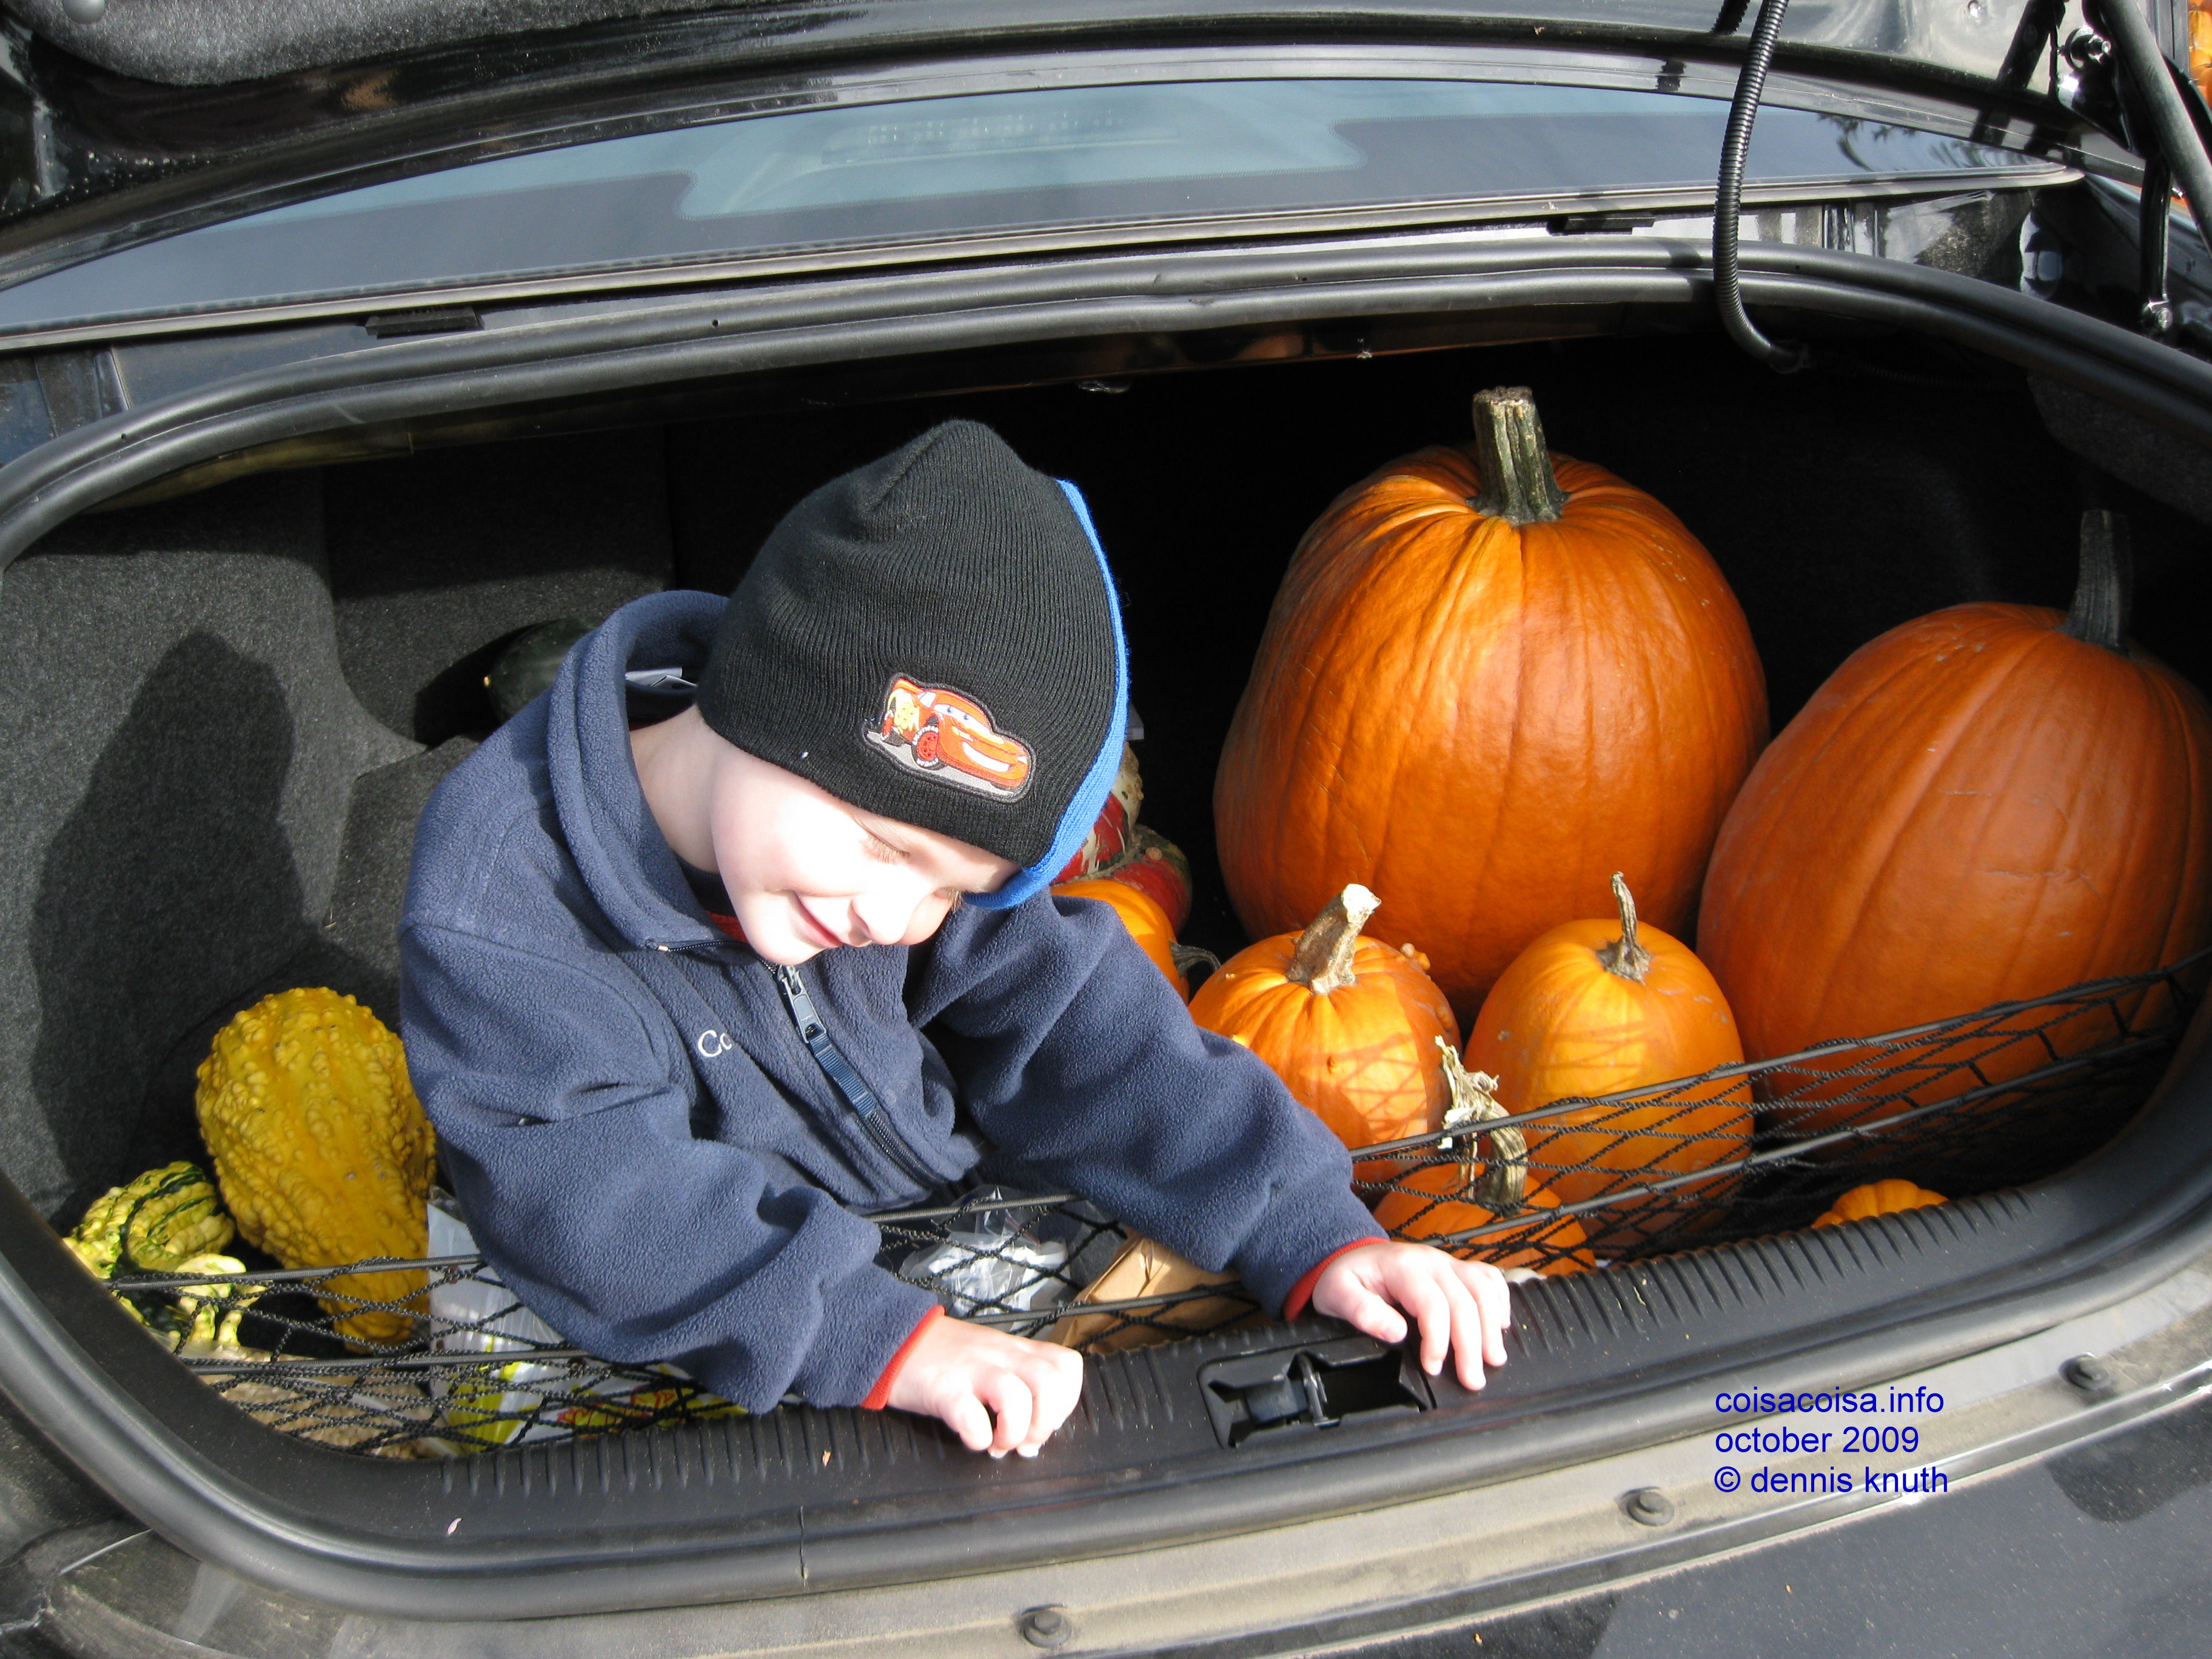 Setting in the Trunk with gourds and pumpkins